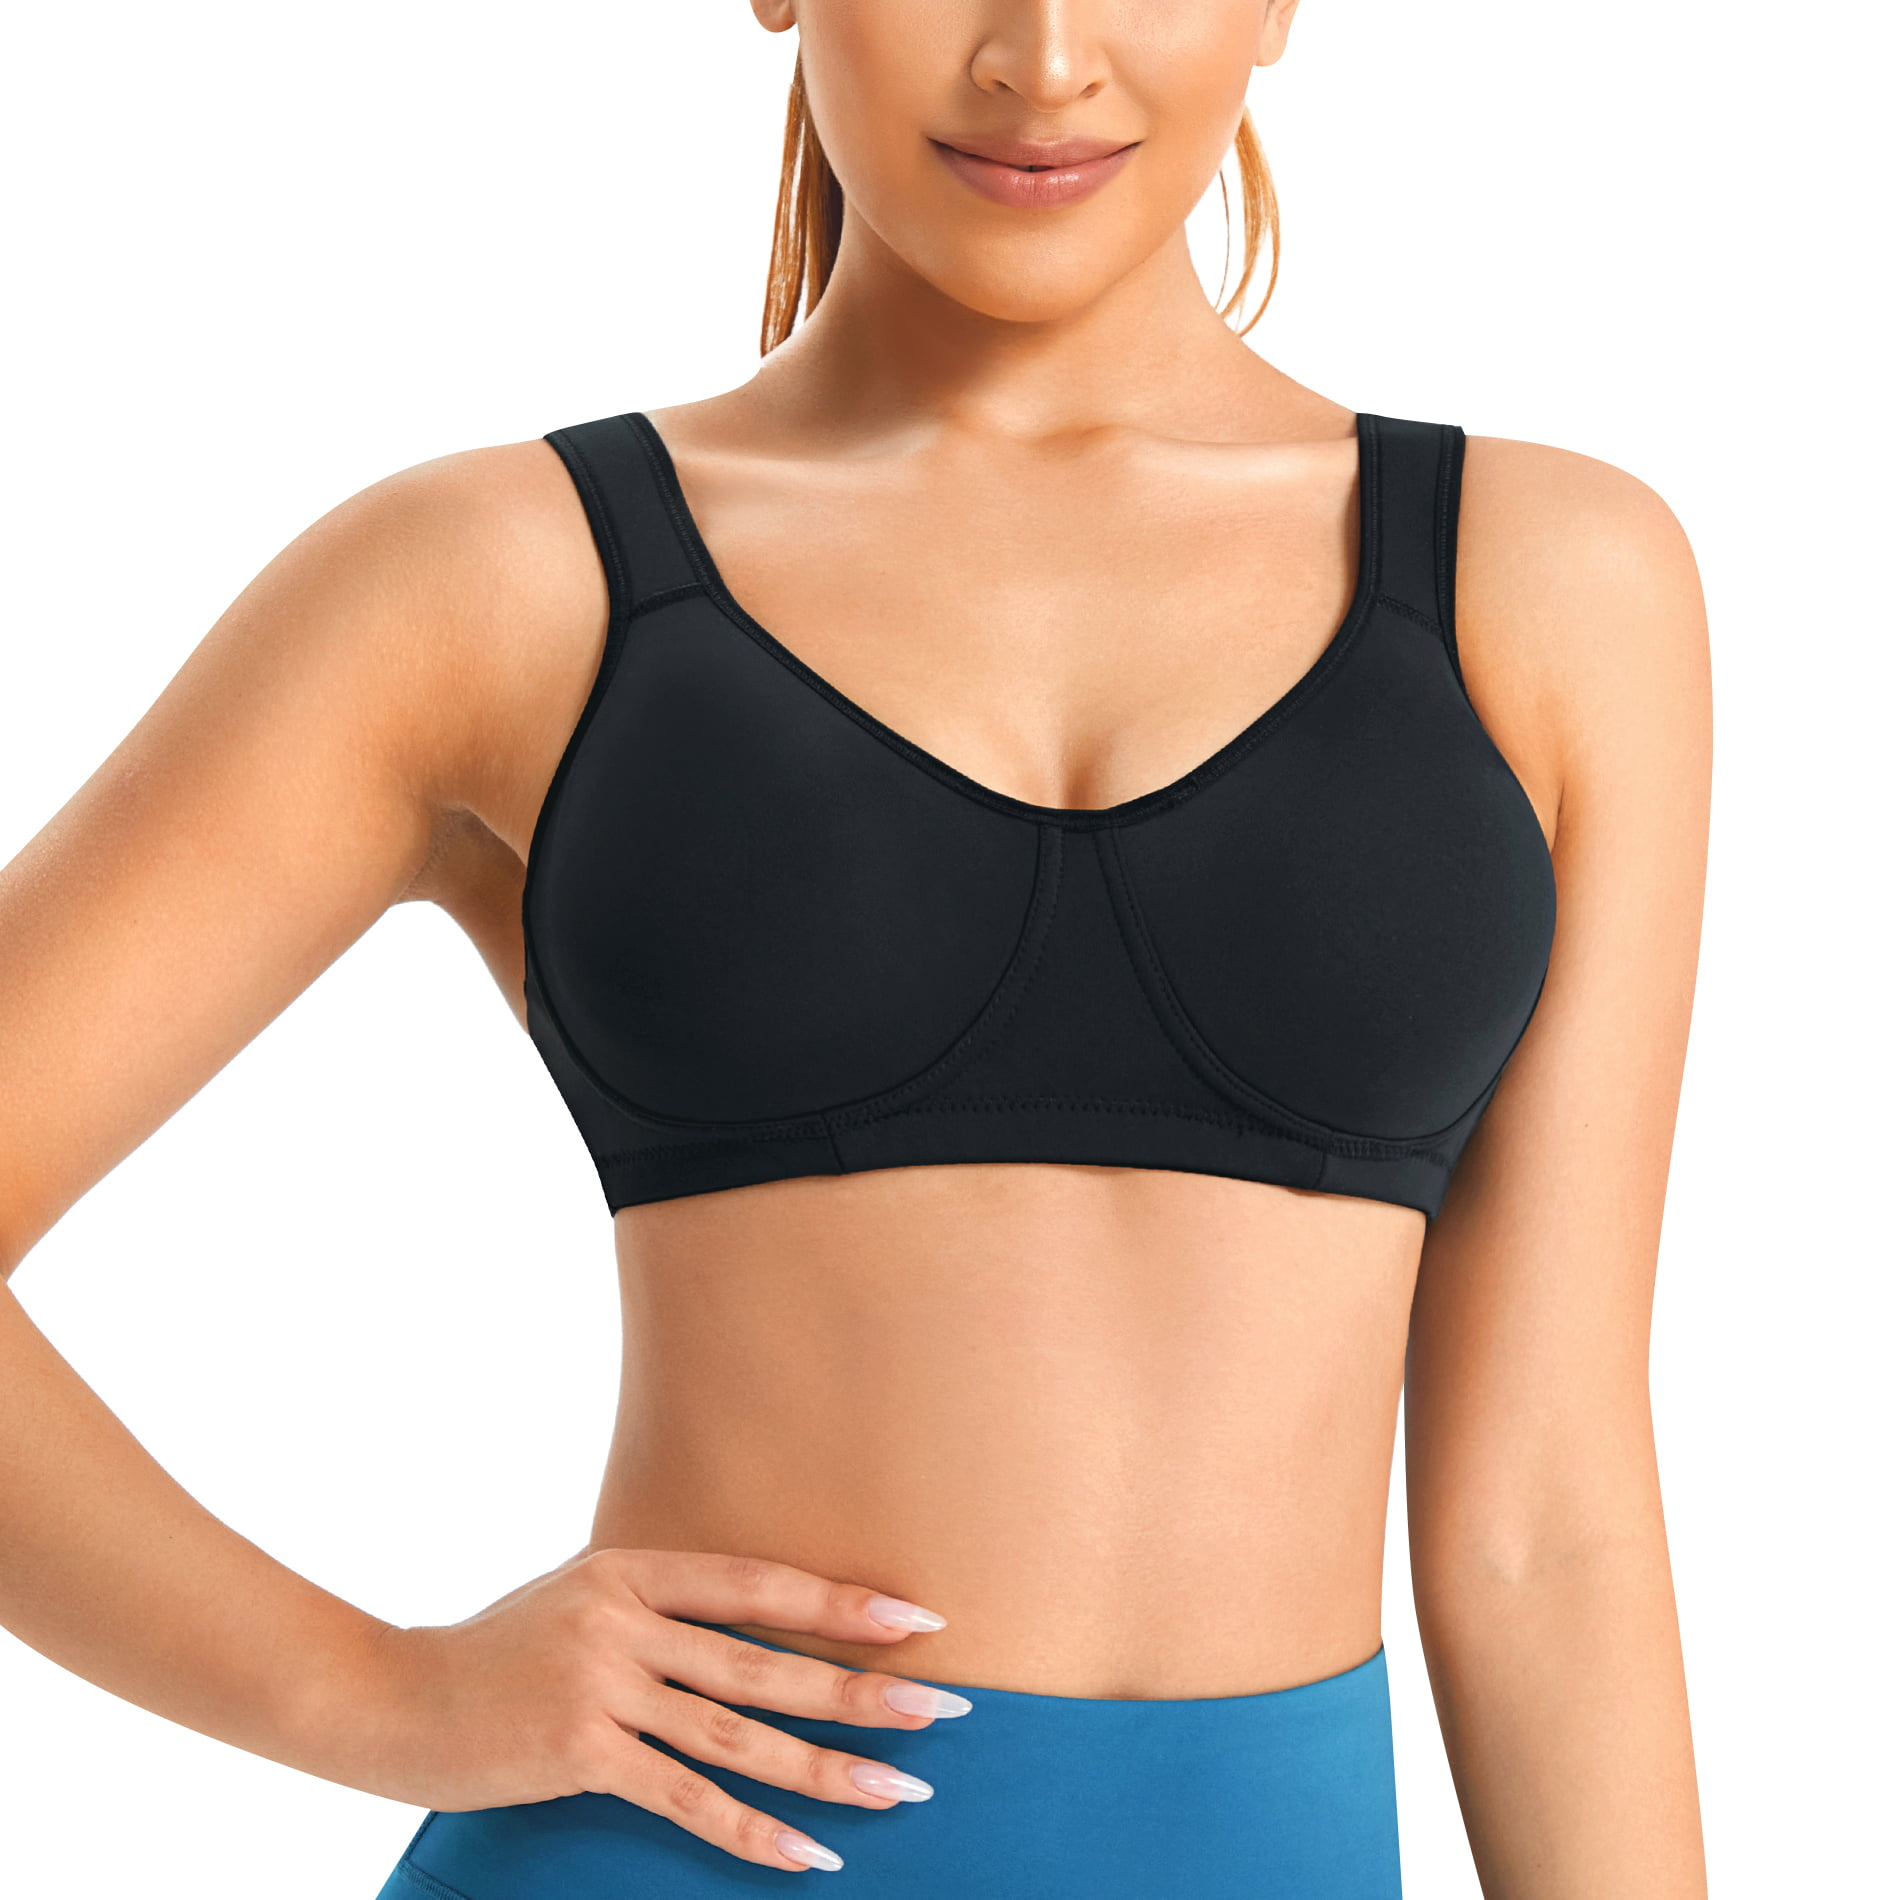 Gotoly High Impact Sports Bra for Women Wireless Adjustable Straps  Supportive Bounce Control Girls Gym Running Bra(Black Small)